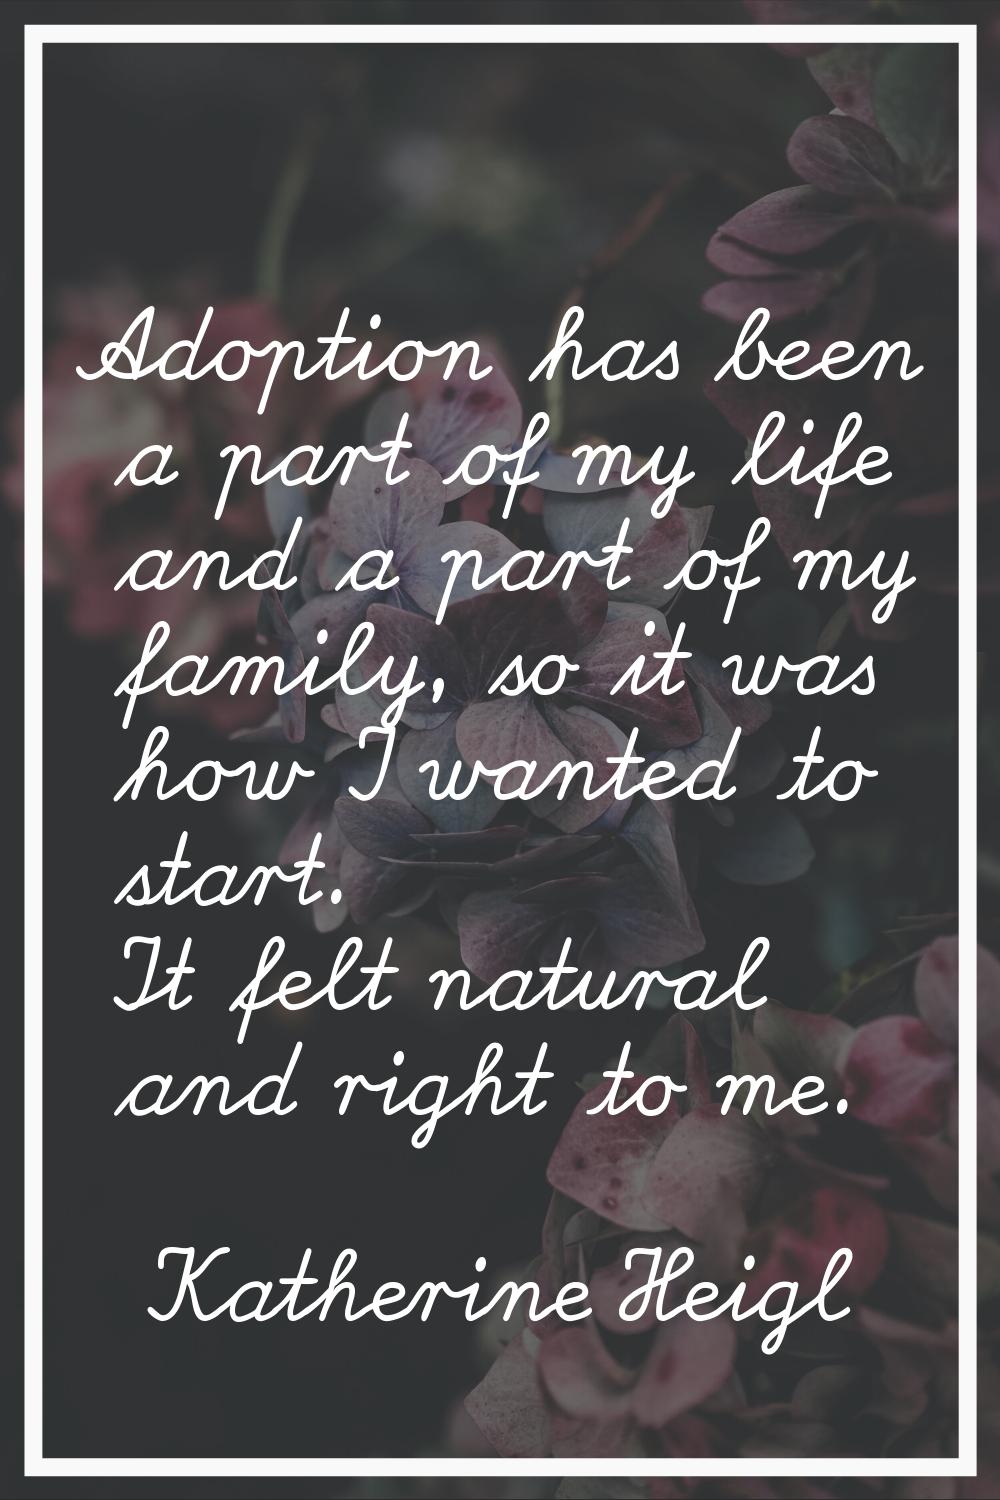 Adoption has been a part of my life and a part of my family, so it was how I wanted to start. It fe